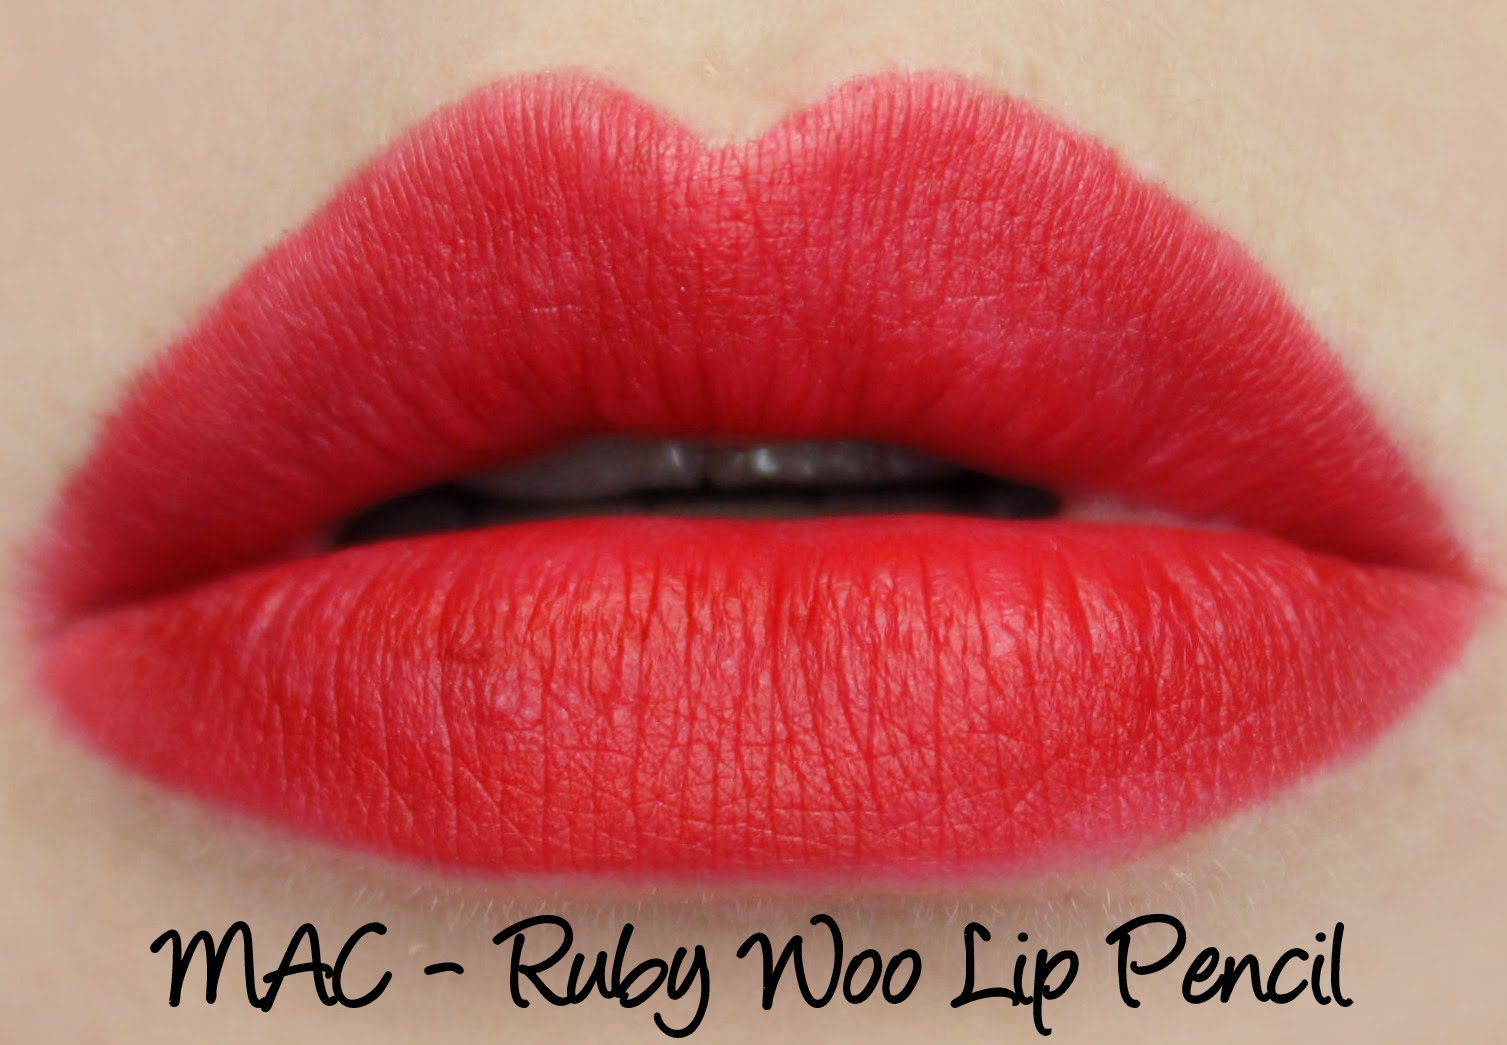 Mac Pencilled In Ruby Woo Lip Pencil Lipglass Swatches Review